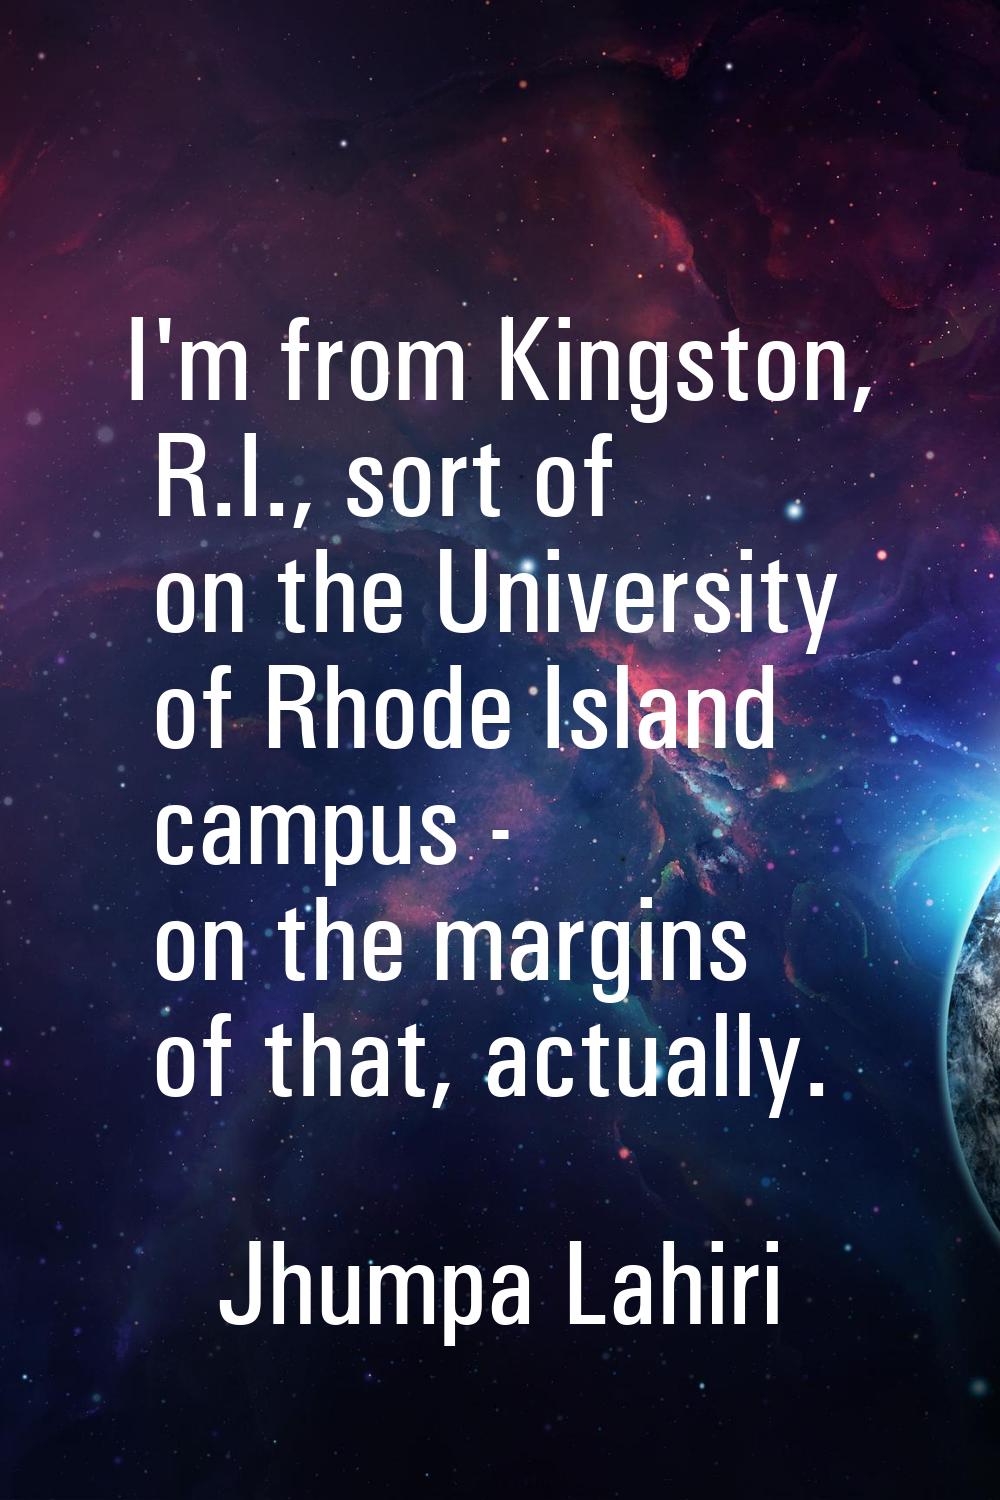 I'm from Kingston, R.I., sort of on the University of Rhode Island campus - on the margins of that,